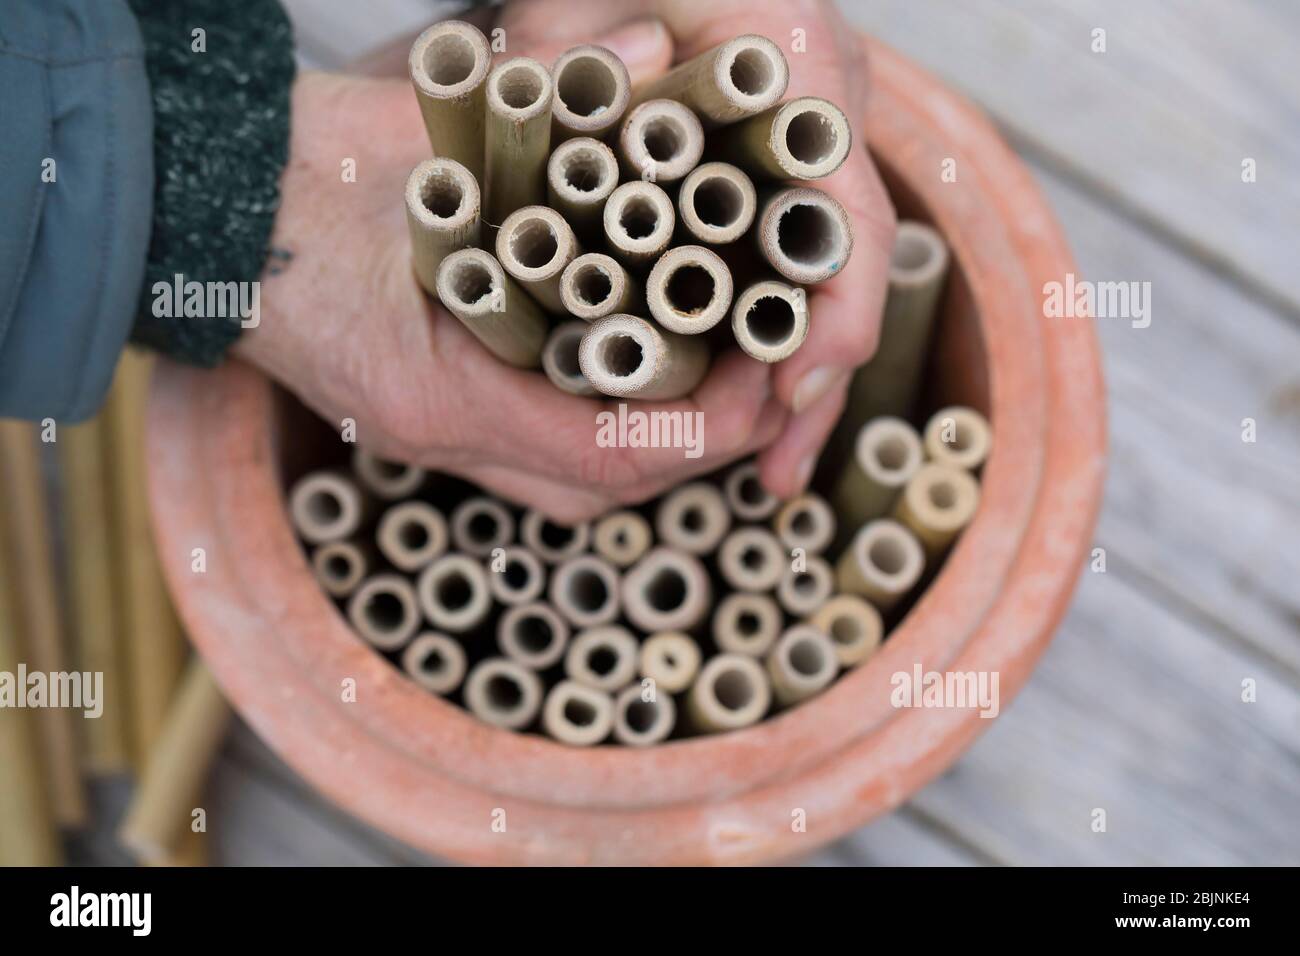 nesting aid for wild bees, step three, sticking 20 cm long bamboo sticks into a flower pot Stock Photo